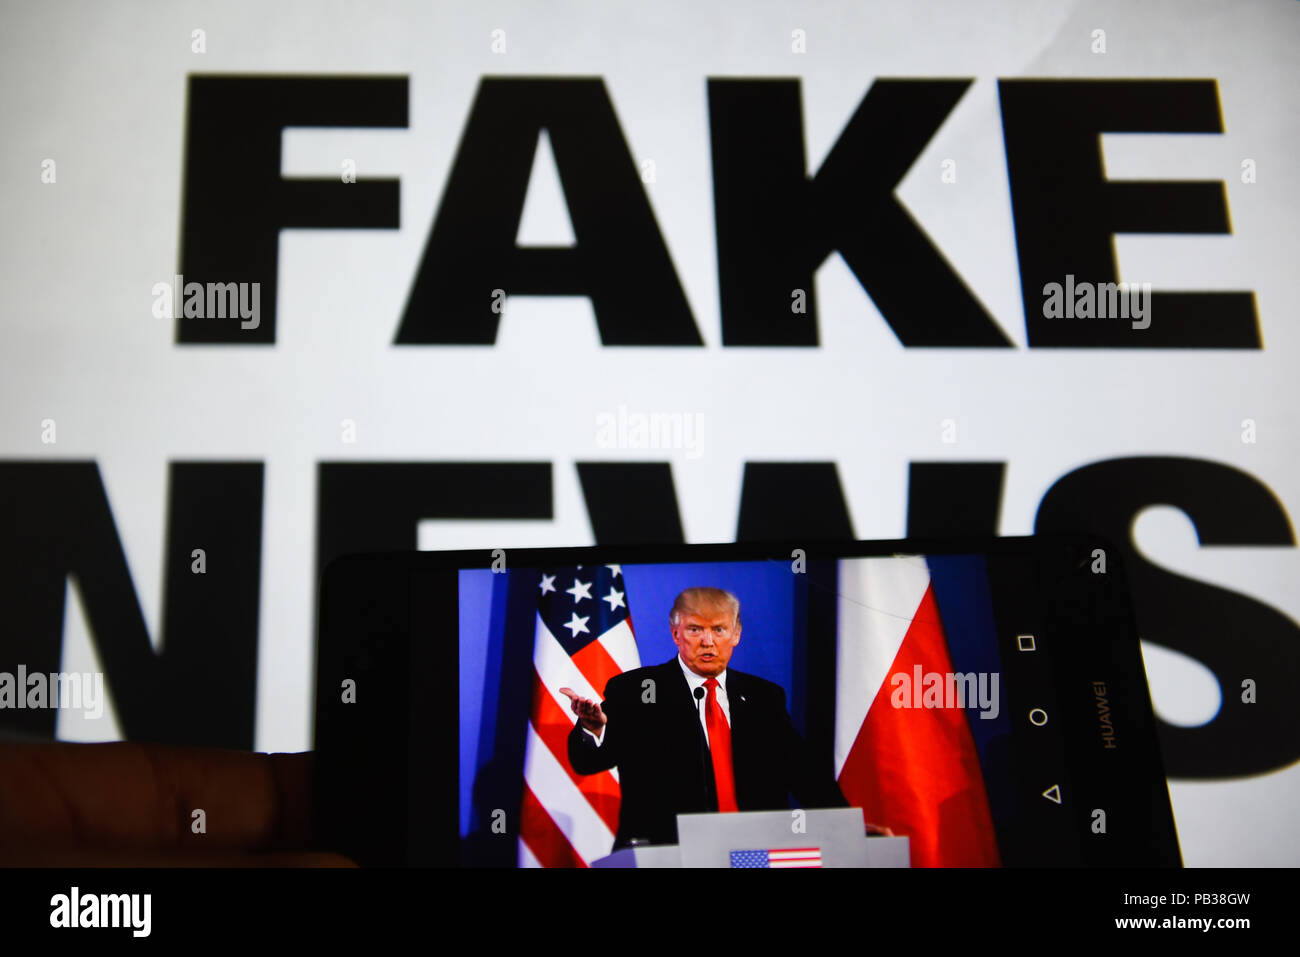 Krakow, Poland. 26th July, 2018. A mobile phone shows President of United States of America, Donald Trump with a sentence saying ''Fake News'' on the background. Credit: Omar Marques/SOPA Images/ZUMA Wire/Alamy Live News Stock Photo